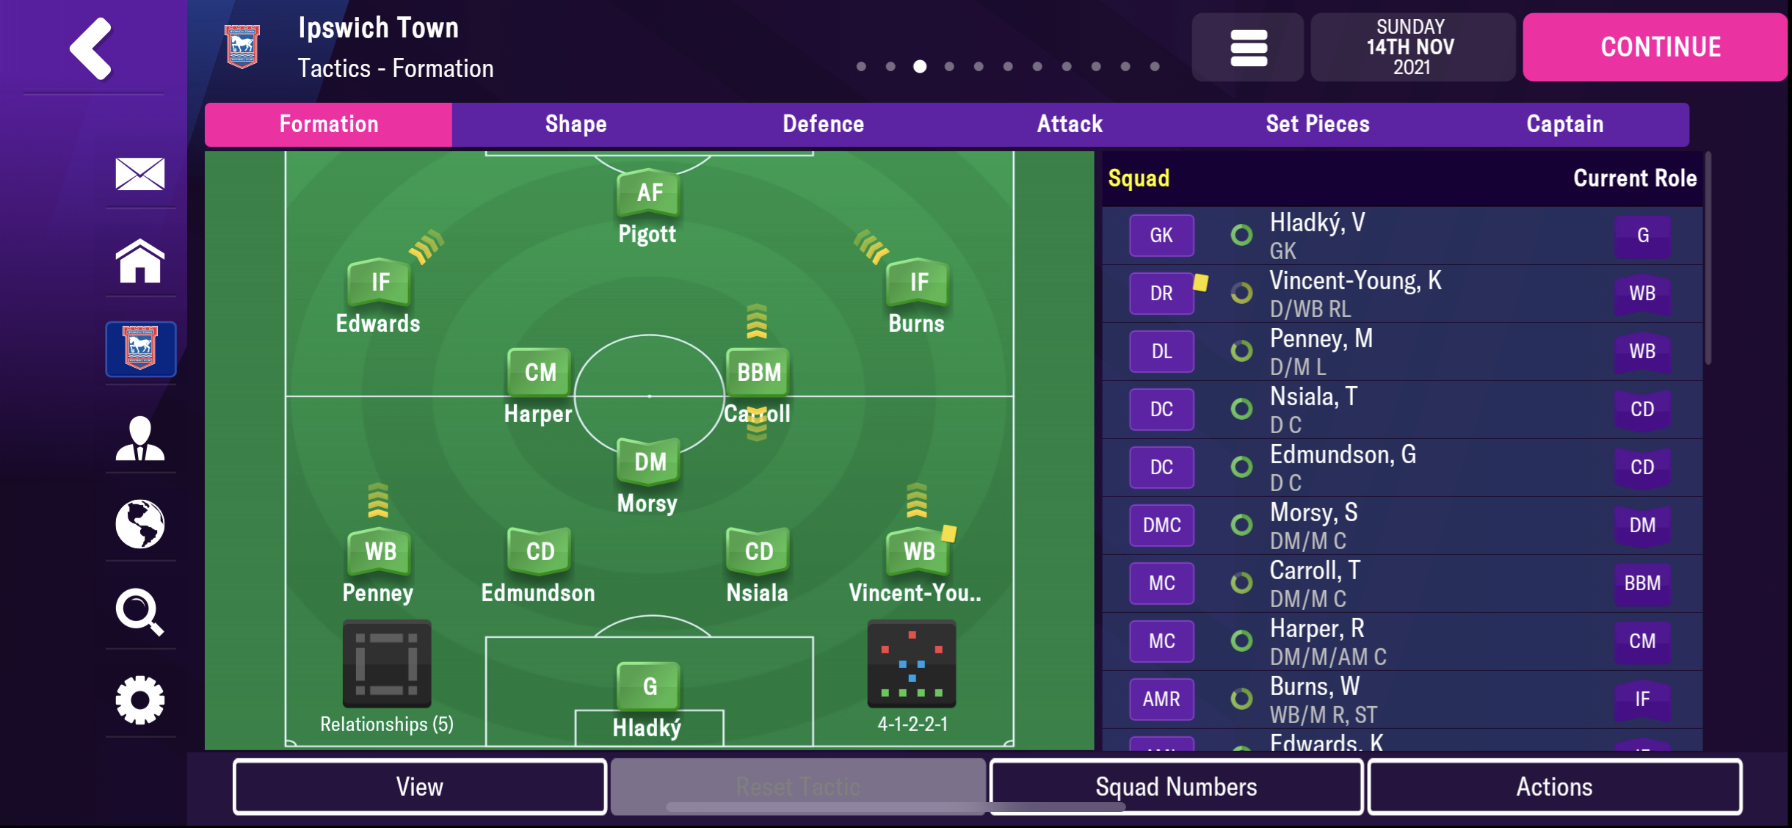 Football Manager 2023: Release date, new features, price, full